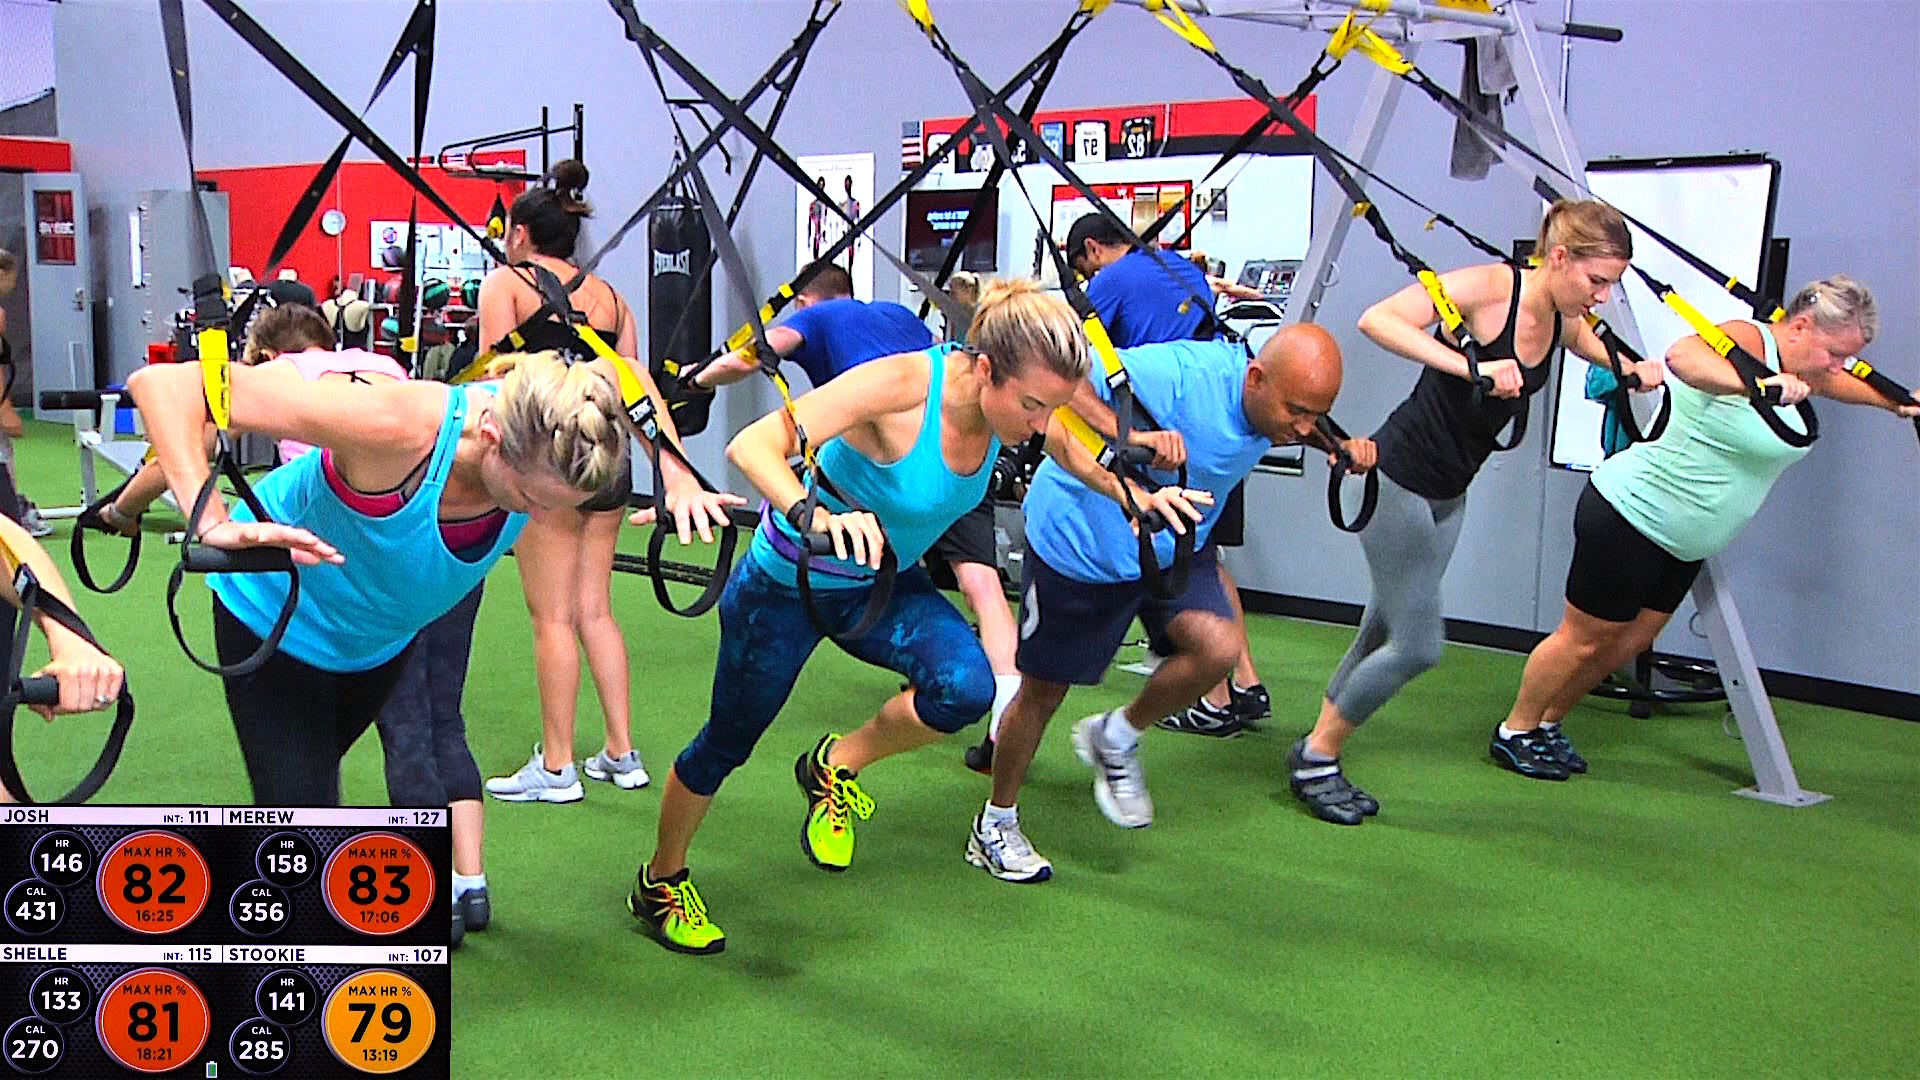 Preview - TRX & Cardio Workout Online! - "Solid & Soaked ...